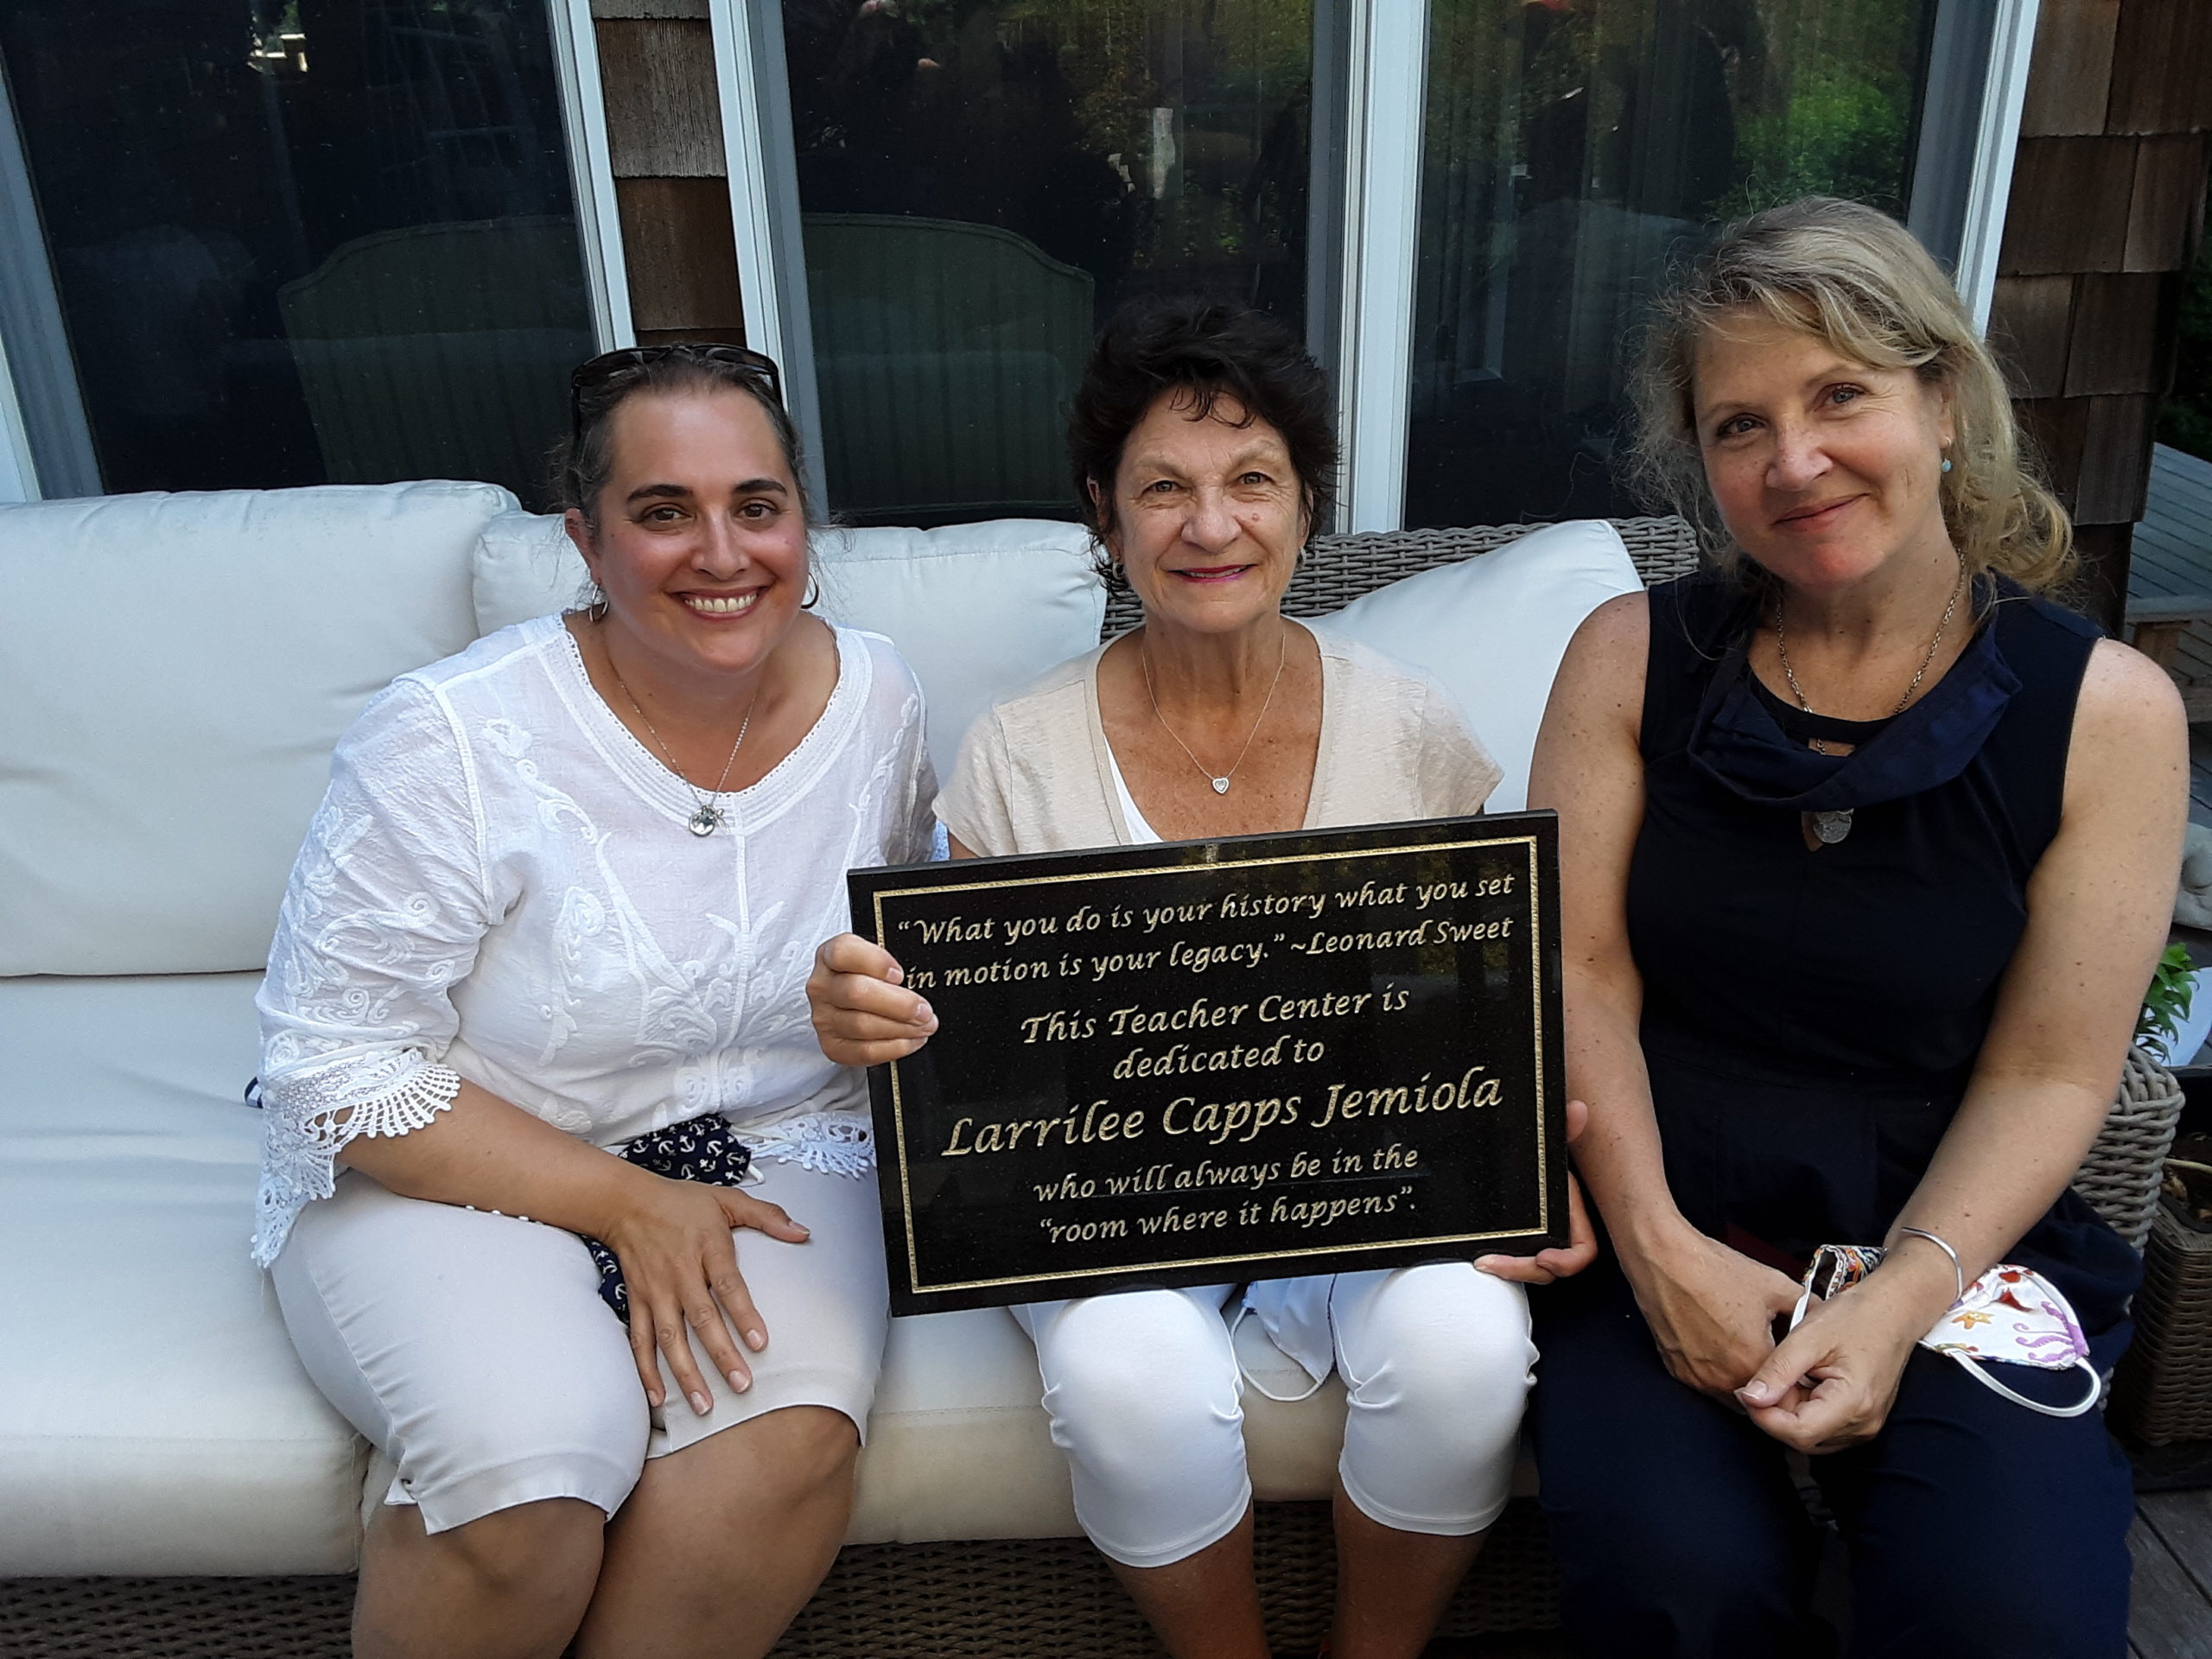 Larrilee Jemiola, an East Hampton resident who is retiring after 51 years of service to the East End educational community, is celebrated at a recent Peconic Teacher Center policy board meeting by new Co-Directors Kim Milton and Kelly Anderson. 